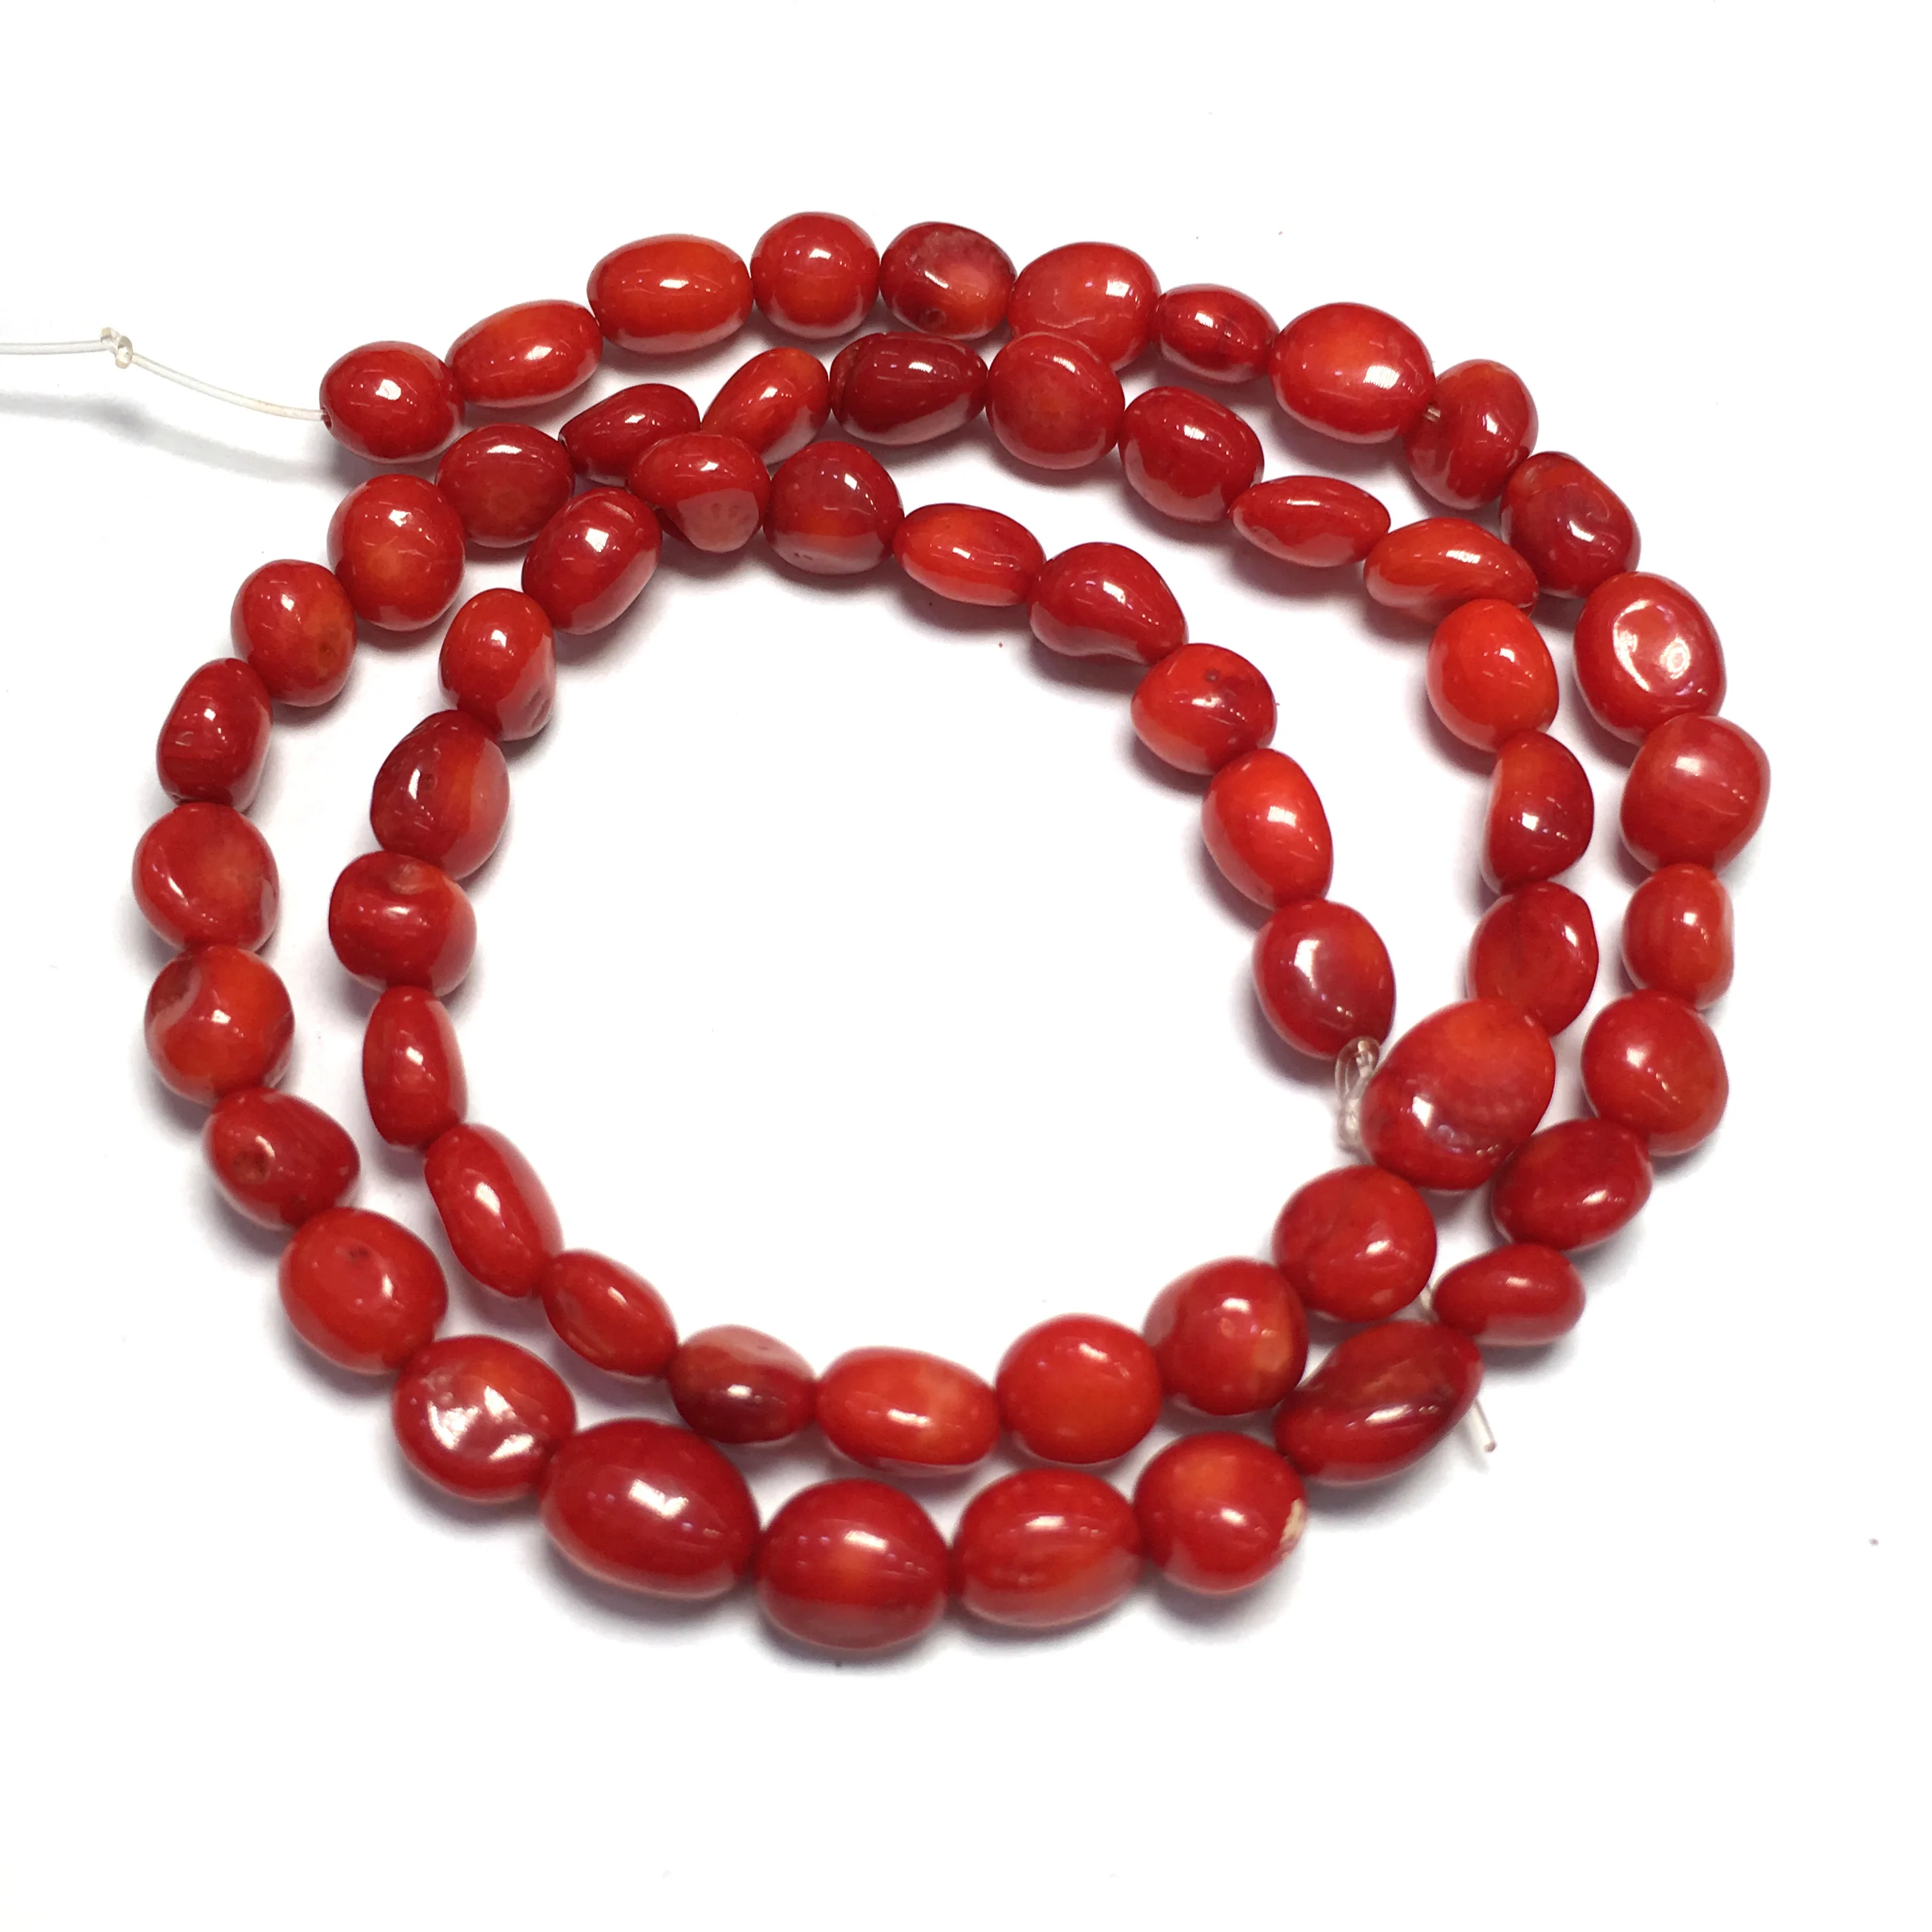 

Fine Natural Coral Beads Irregular Shape Small Hole Bead for Women Jewelry Making DIY Necklace Bracelet Accessories 15inch